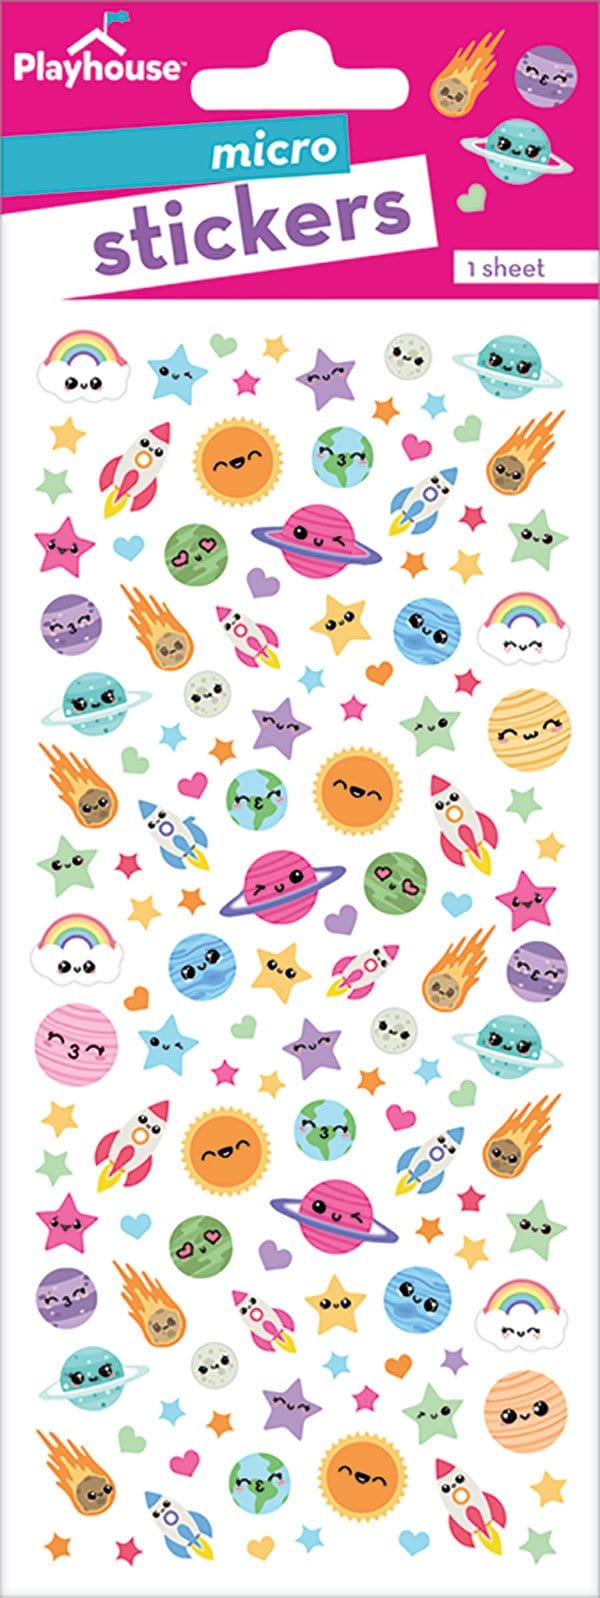 Mini stickers featuring colorful illustrated planets, comets and rocket ships shown in package.